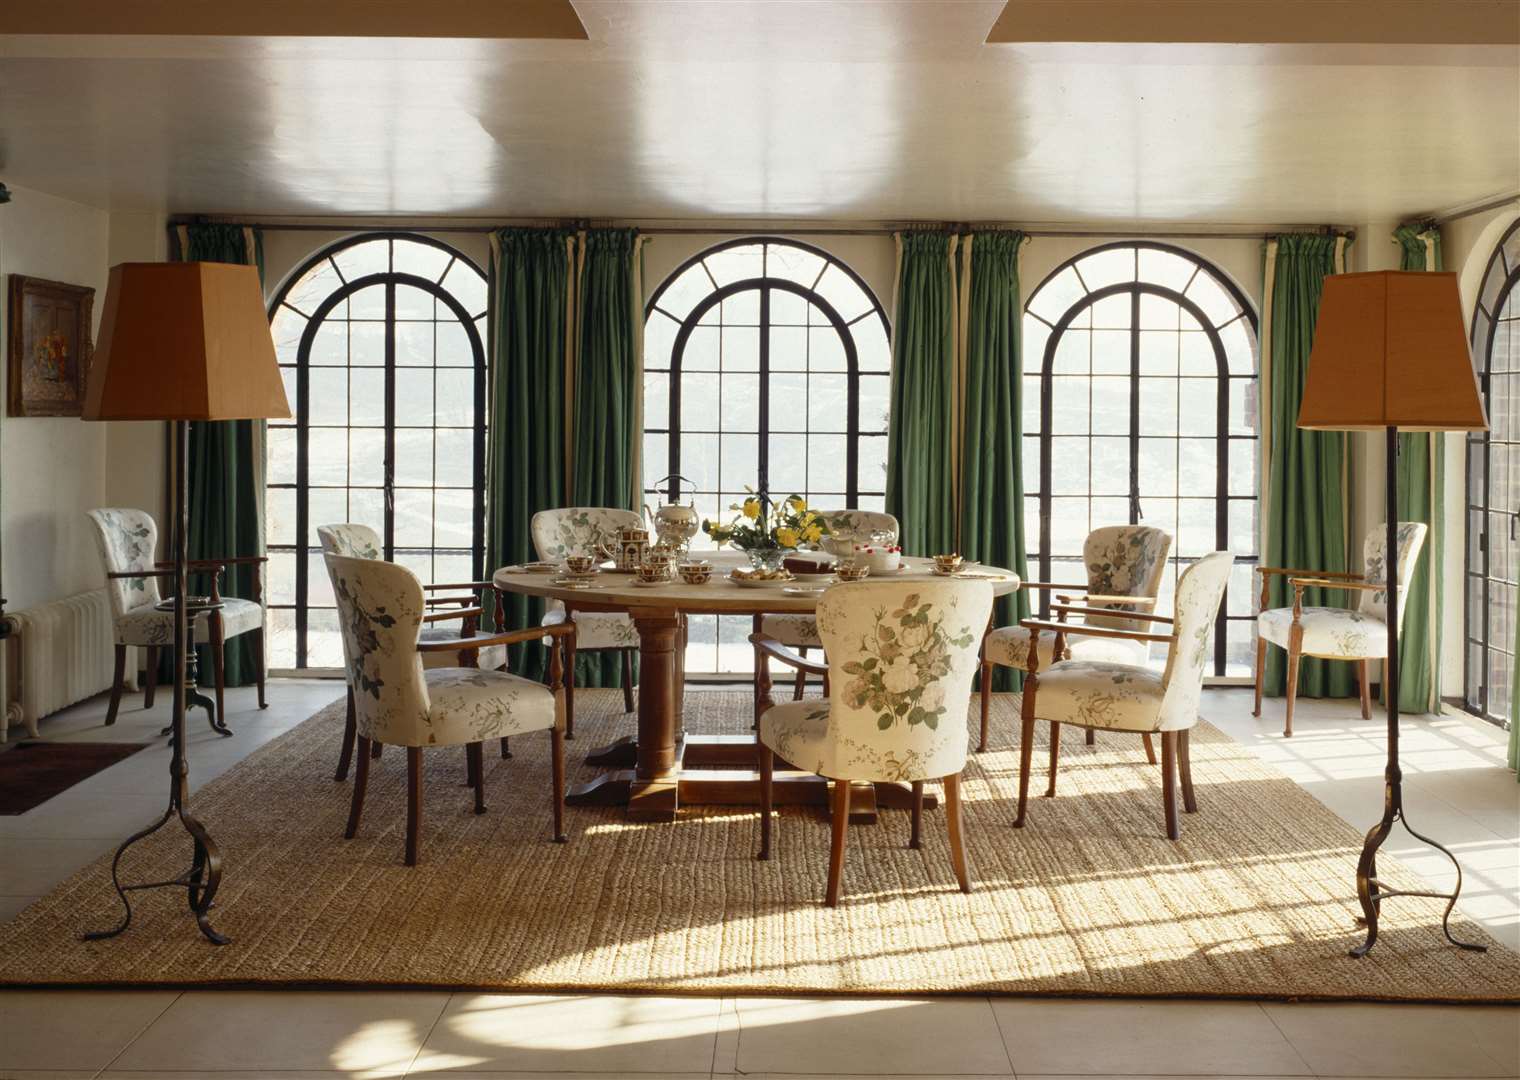 View of the dining table and chairs in the Dining Room at Chartwell today Picture: National Trust Images/ Andreas von Einsiedel